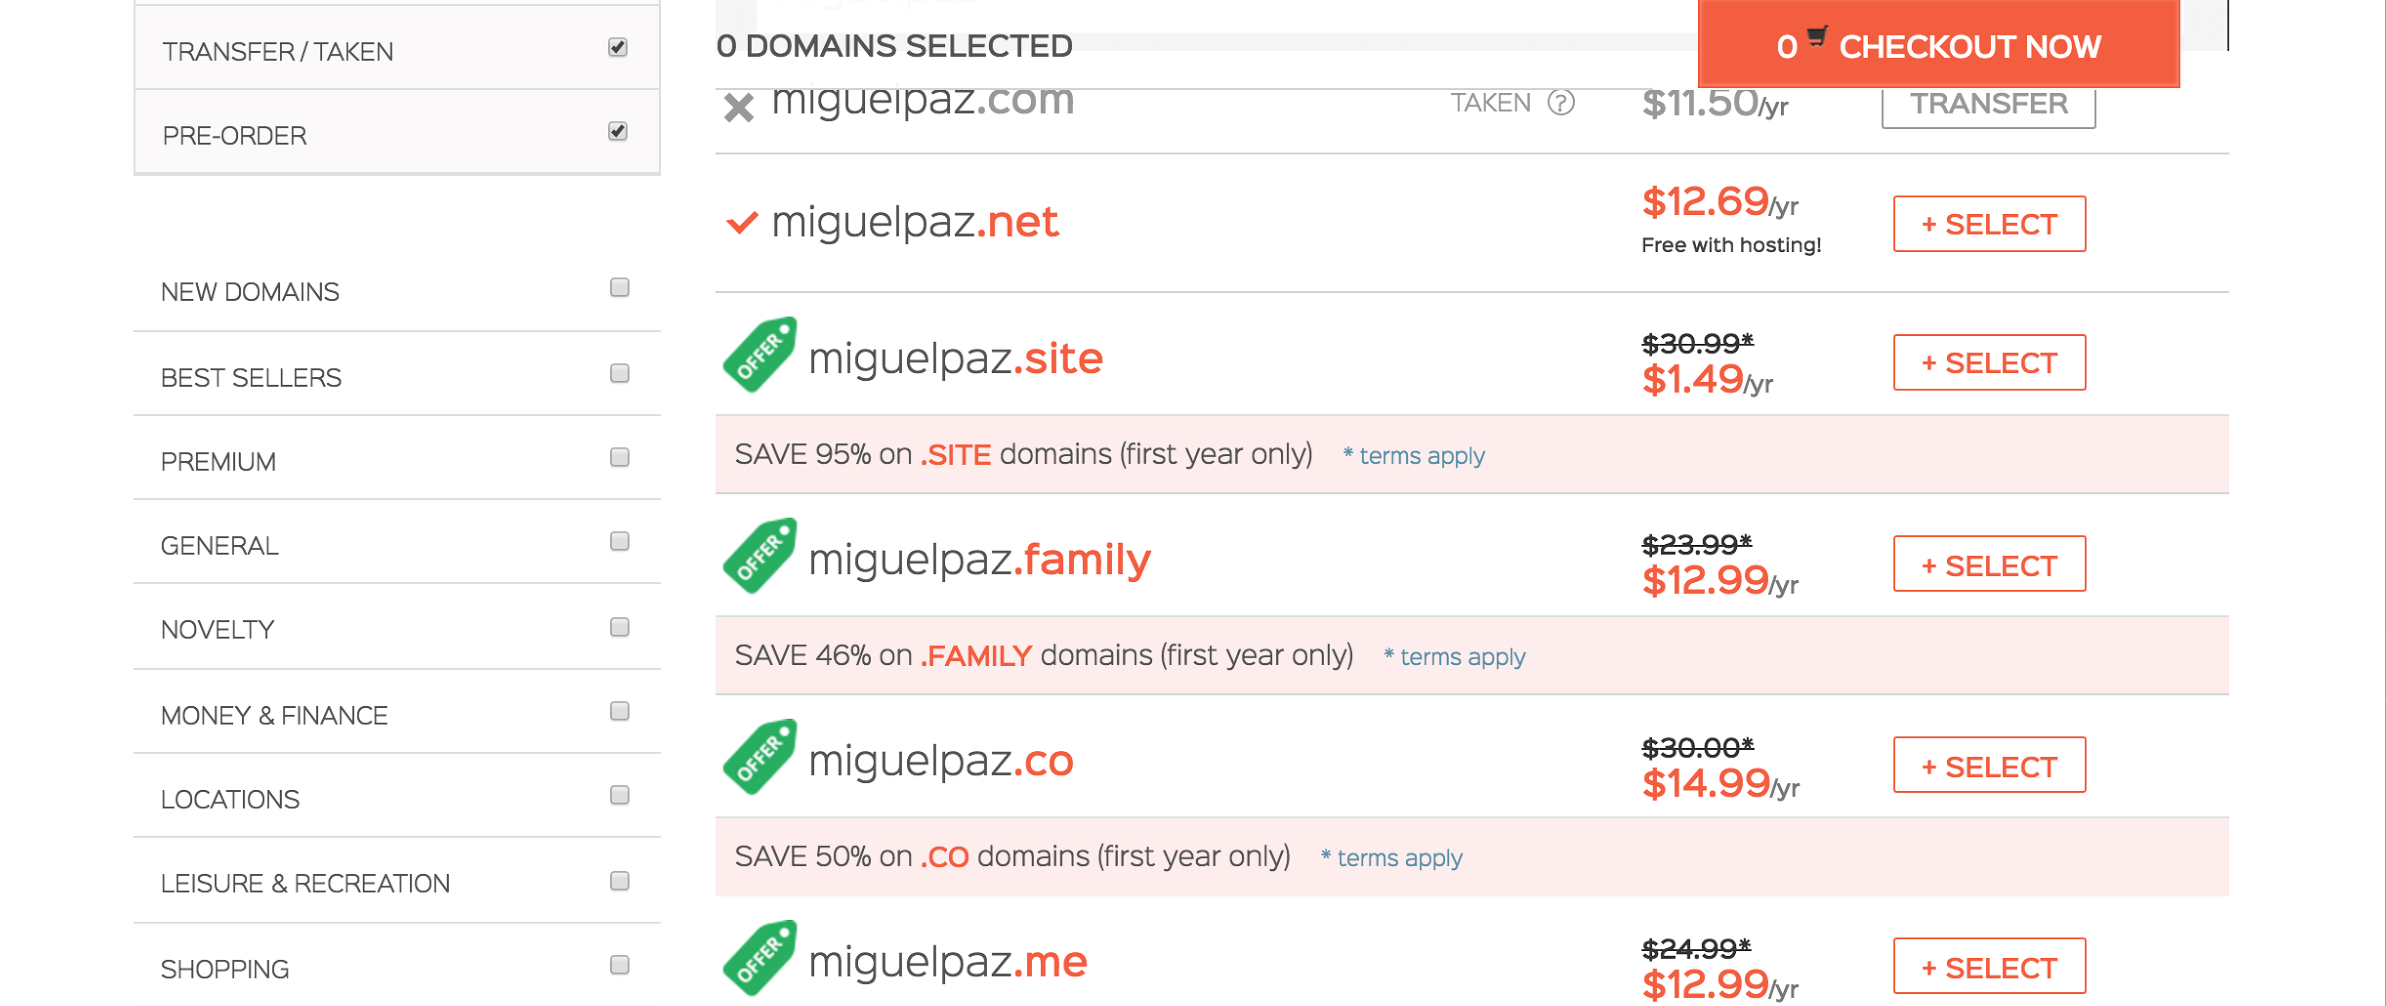 Options to choose a domain name from